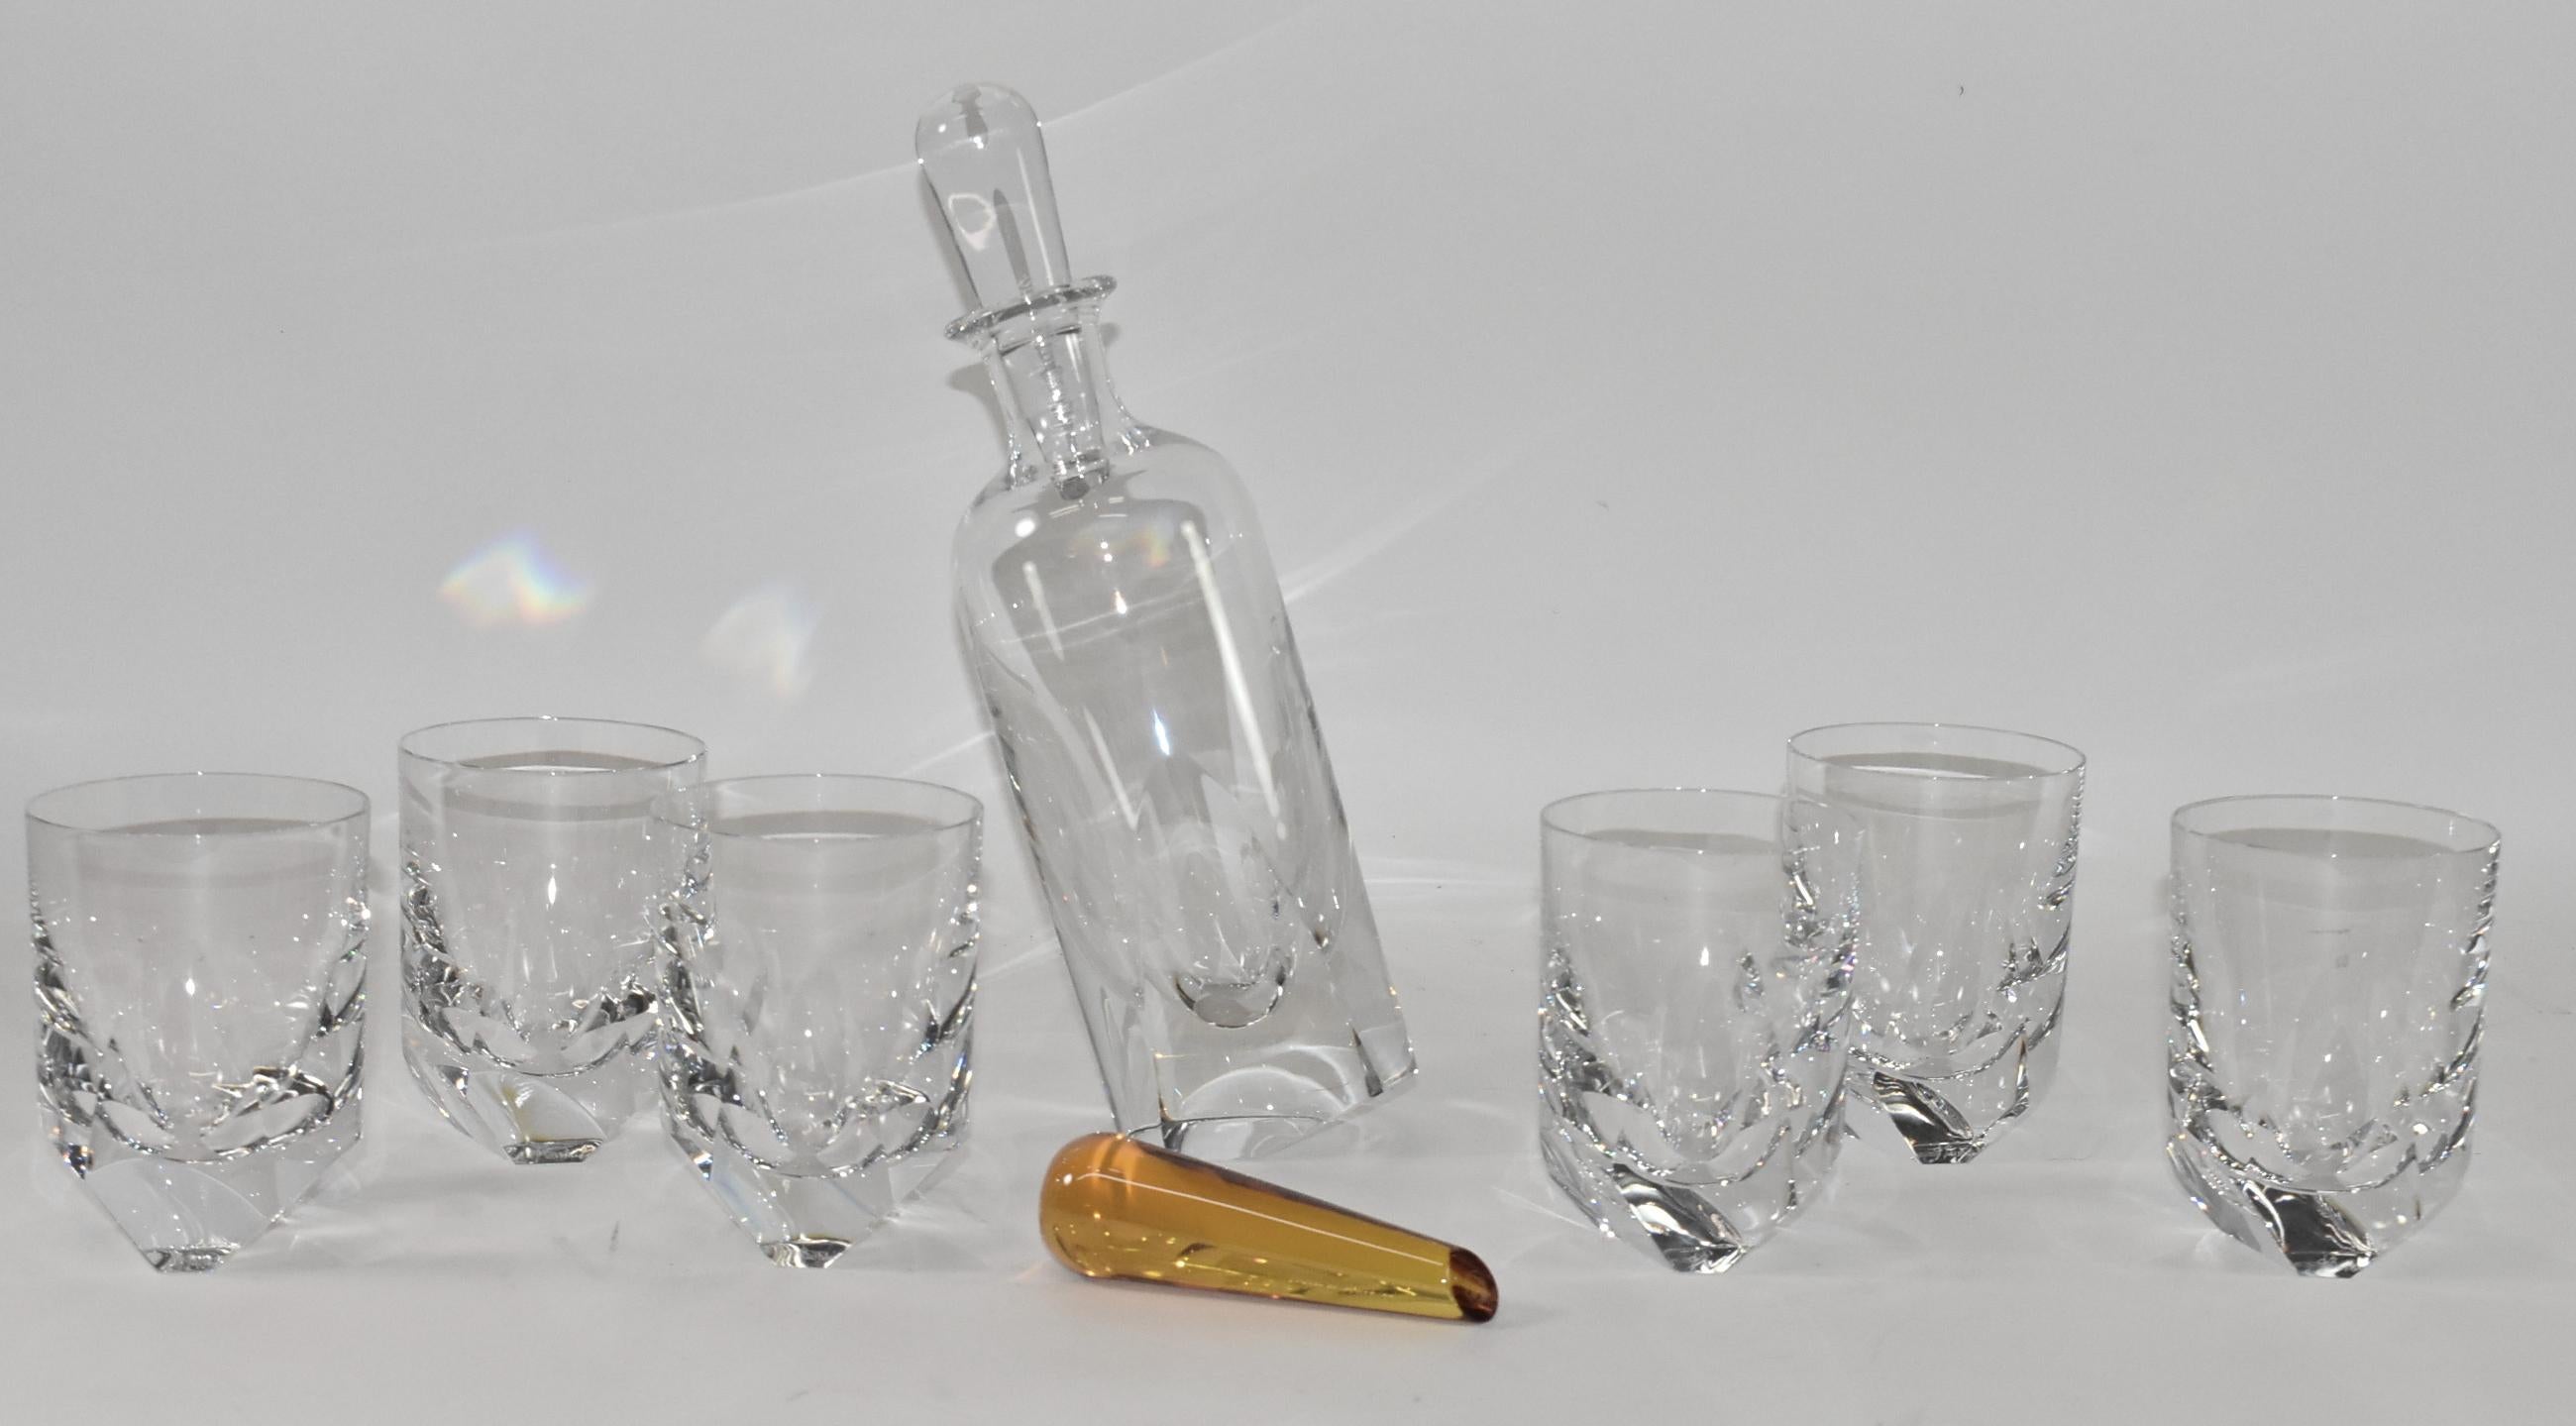 Thomas Bastide for Baccarat Crystal Decanter Set with 6 glasses. Thomas Bastide 20th Century signed Limited Edition Baccarat Crystal 